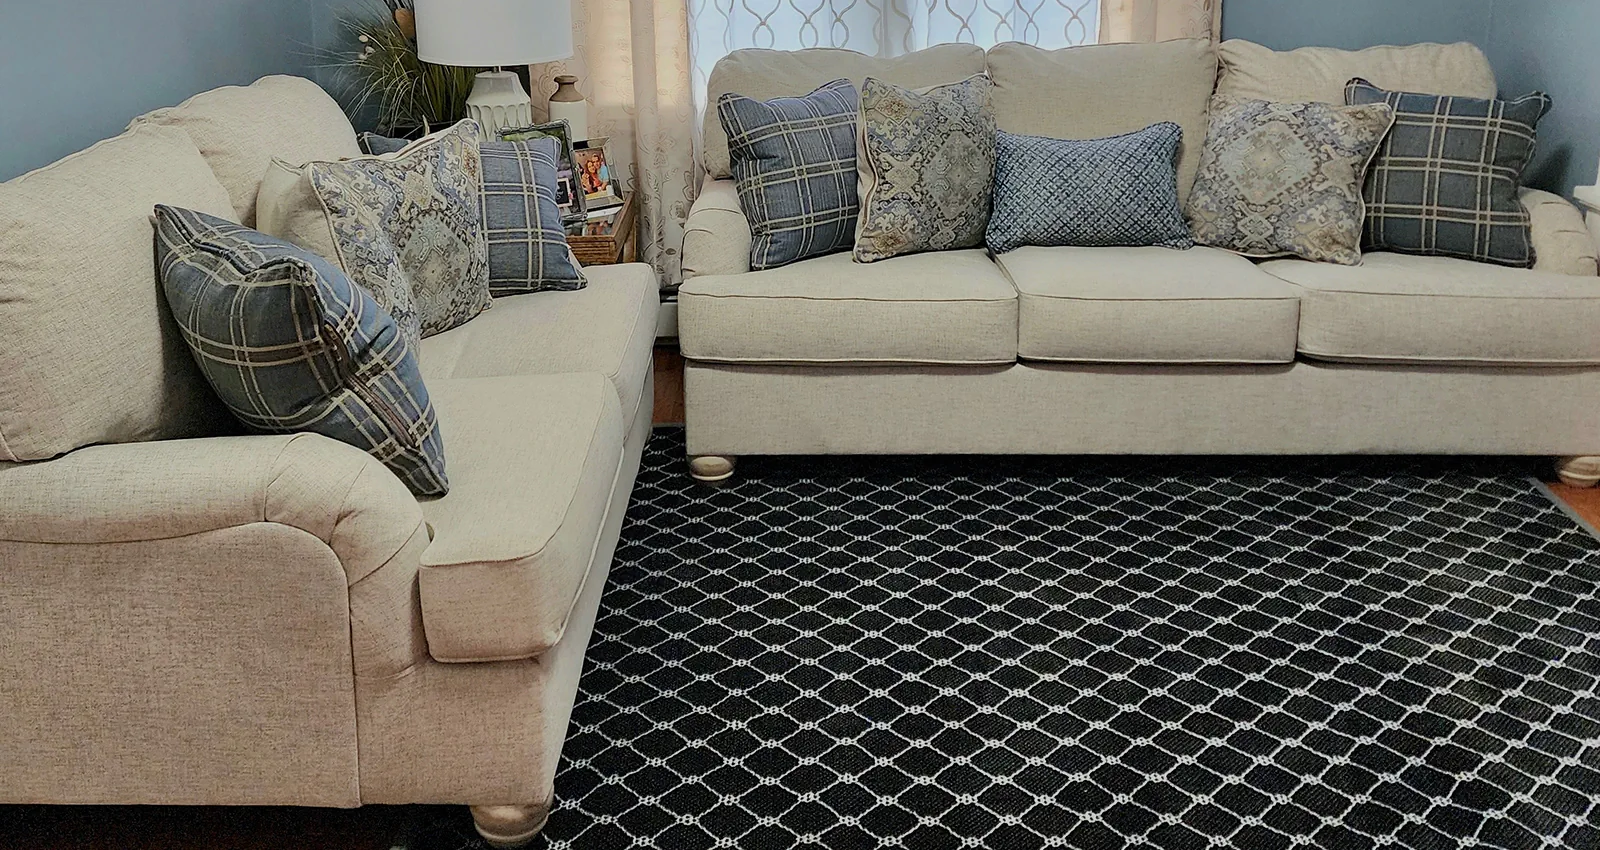 Finest Carpet Service<br class="d-none d-md-block"> for Every Living Space ™